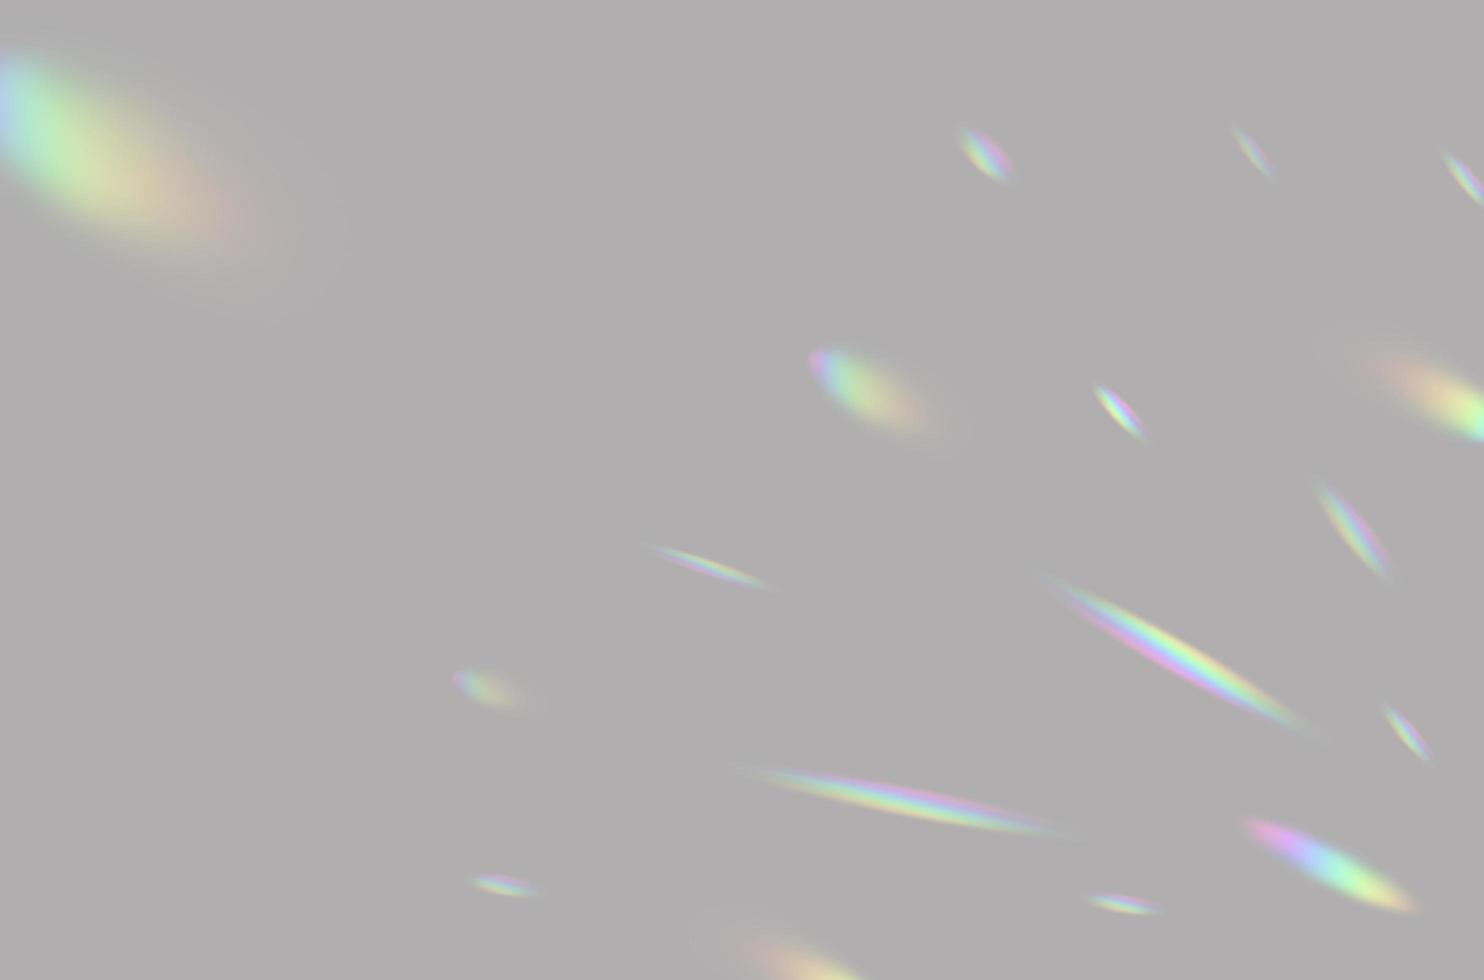 Abstract of blurred rainbow prism light overlay on grey background for mockup and decorative photo